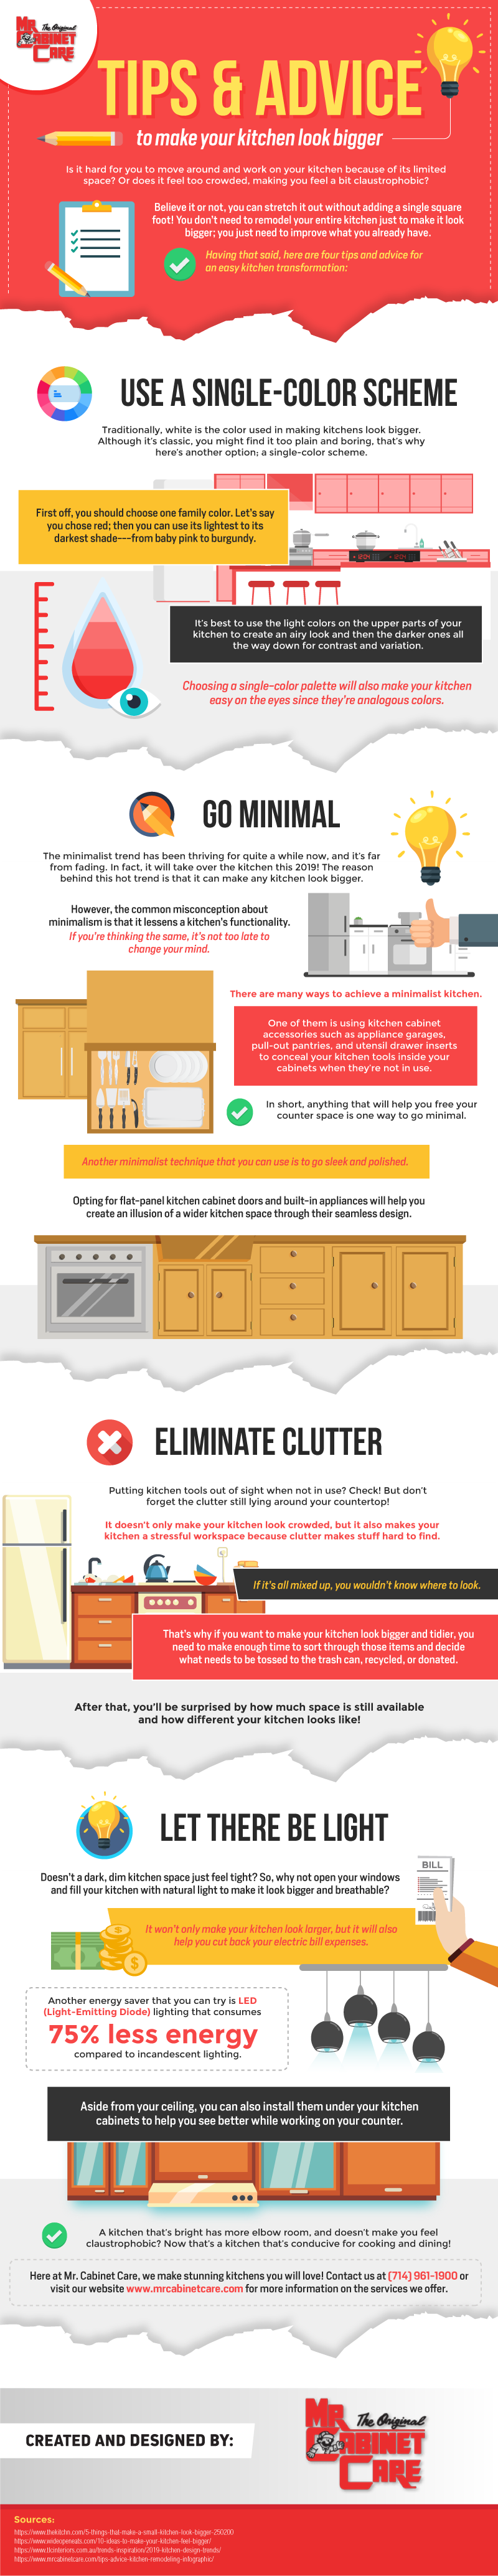 Tips and Advice to Make Your Kitchen Look Bigger - Infographic